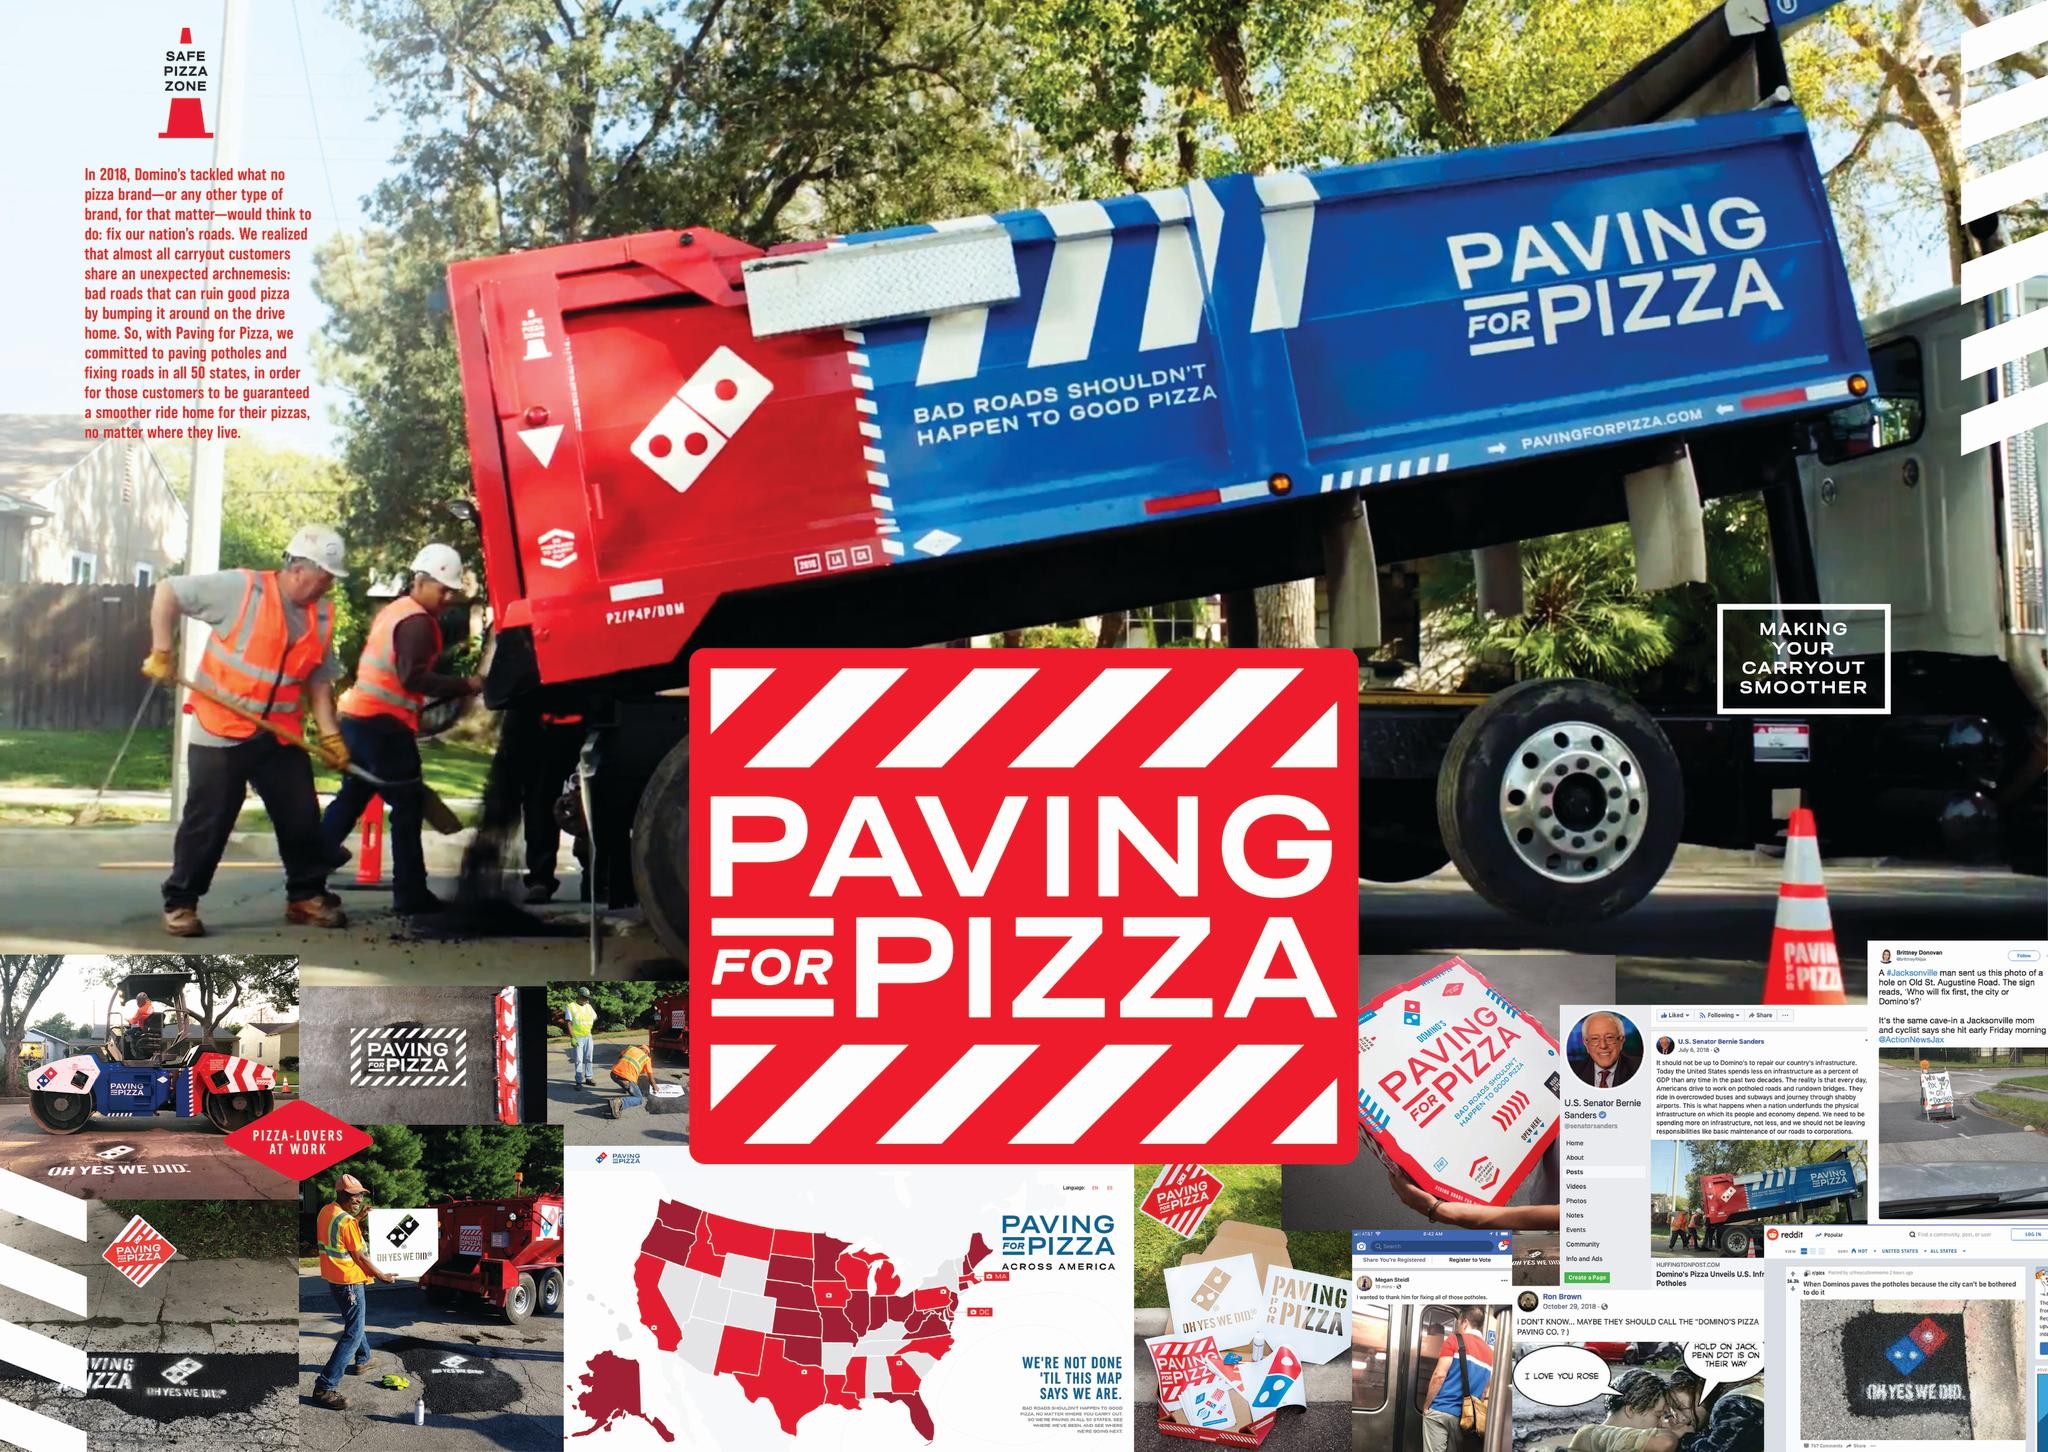 PAVING FOR PIZZA